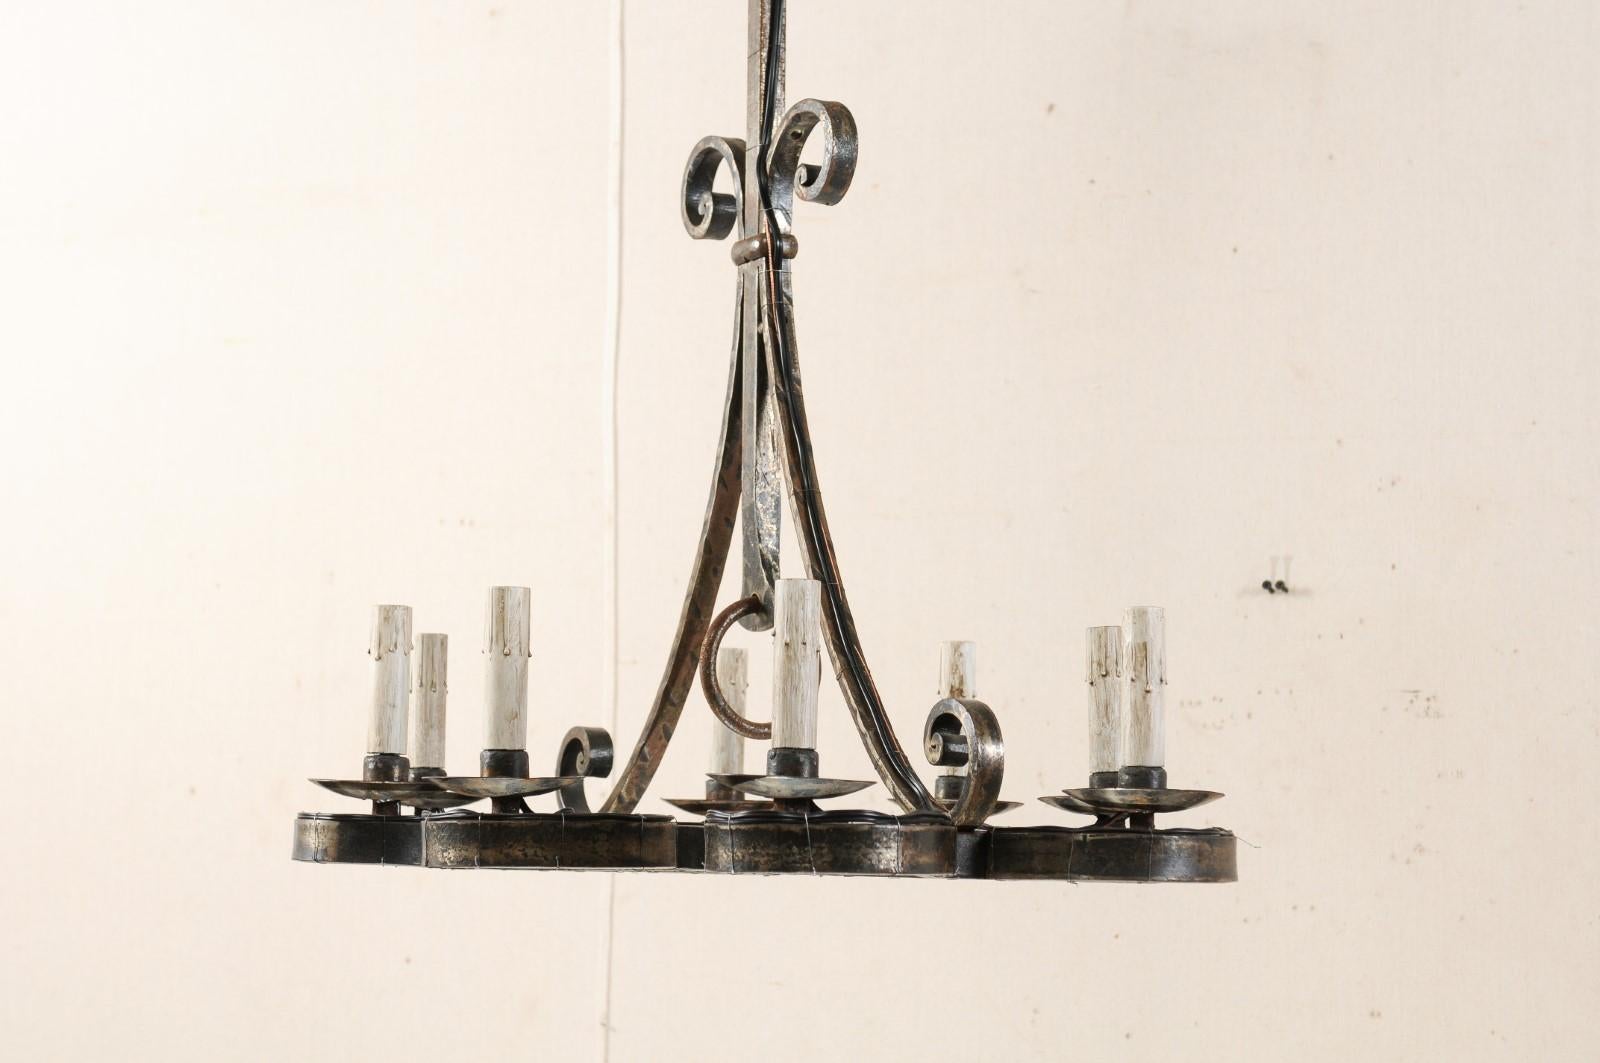 A French mid-20th century suspended eight-light forged-iron chandelier. This vintage French chandelier features a central gallery made up of downward facing scrolled iron bands, whereas each perimeter scroll is topped with an iron bobèche and